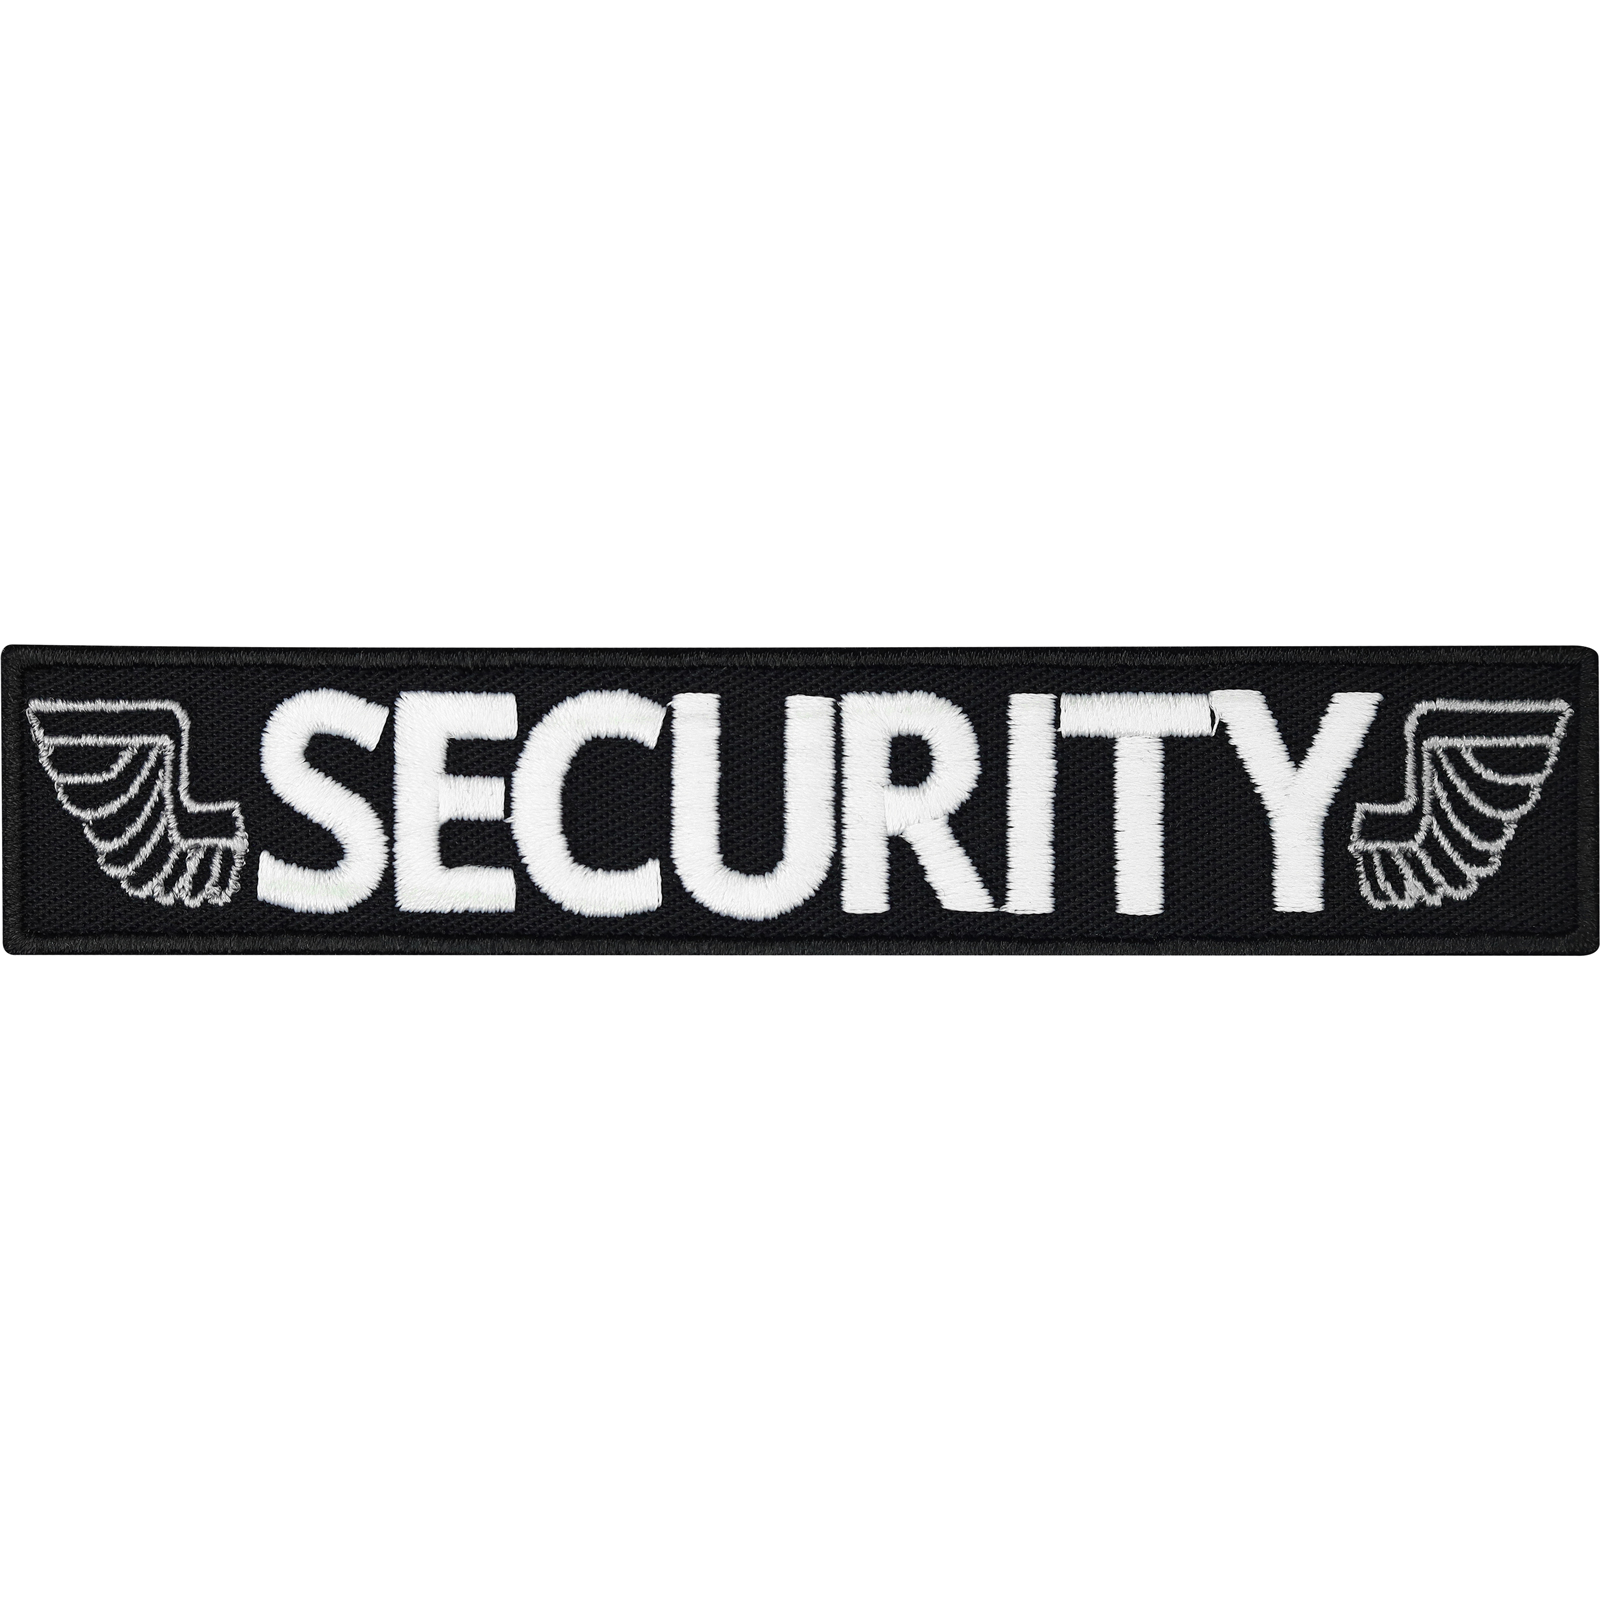 Security - Patch